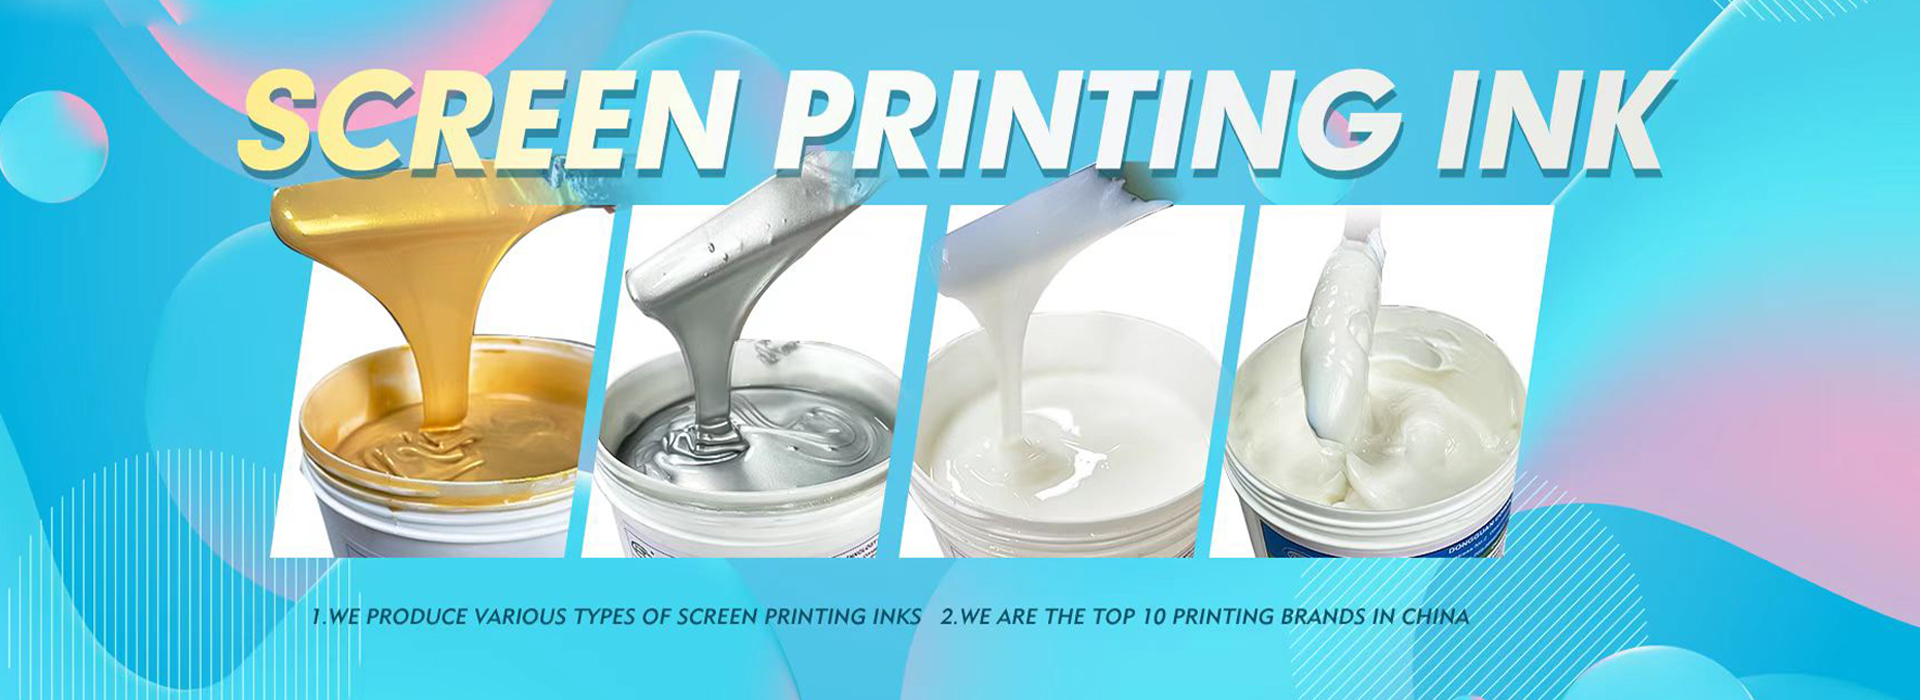 Cowint screen printing paste